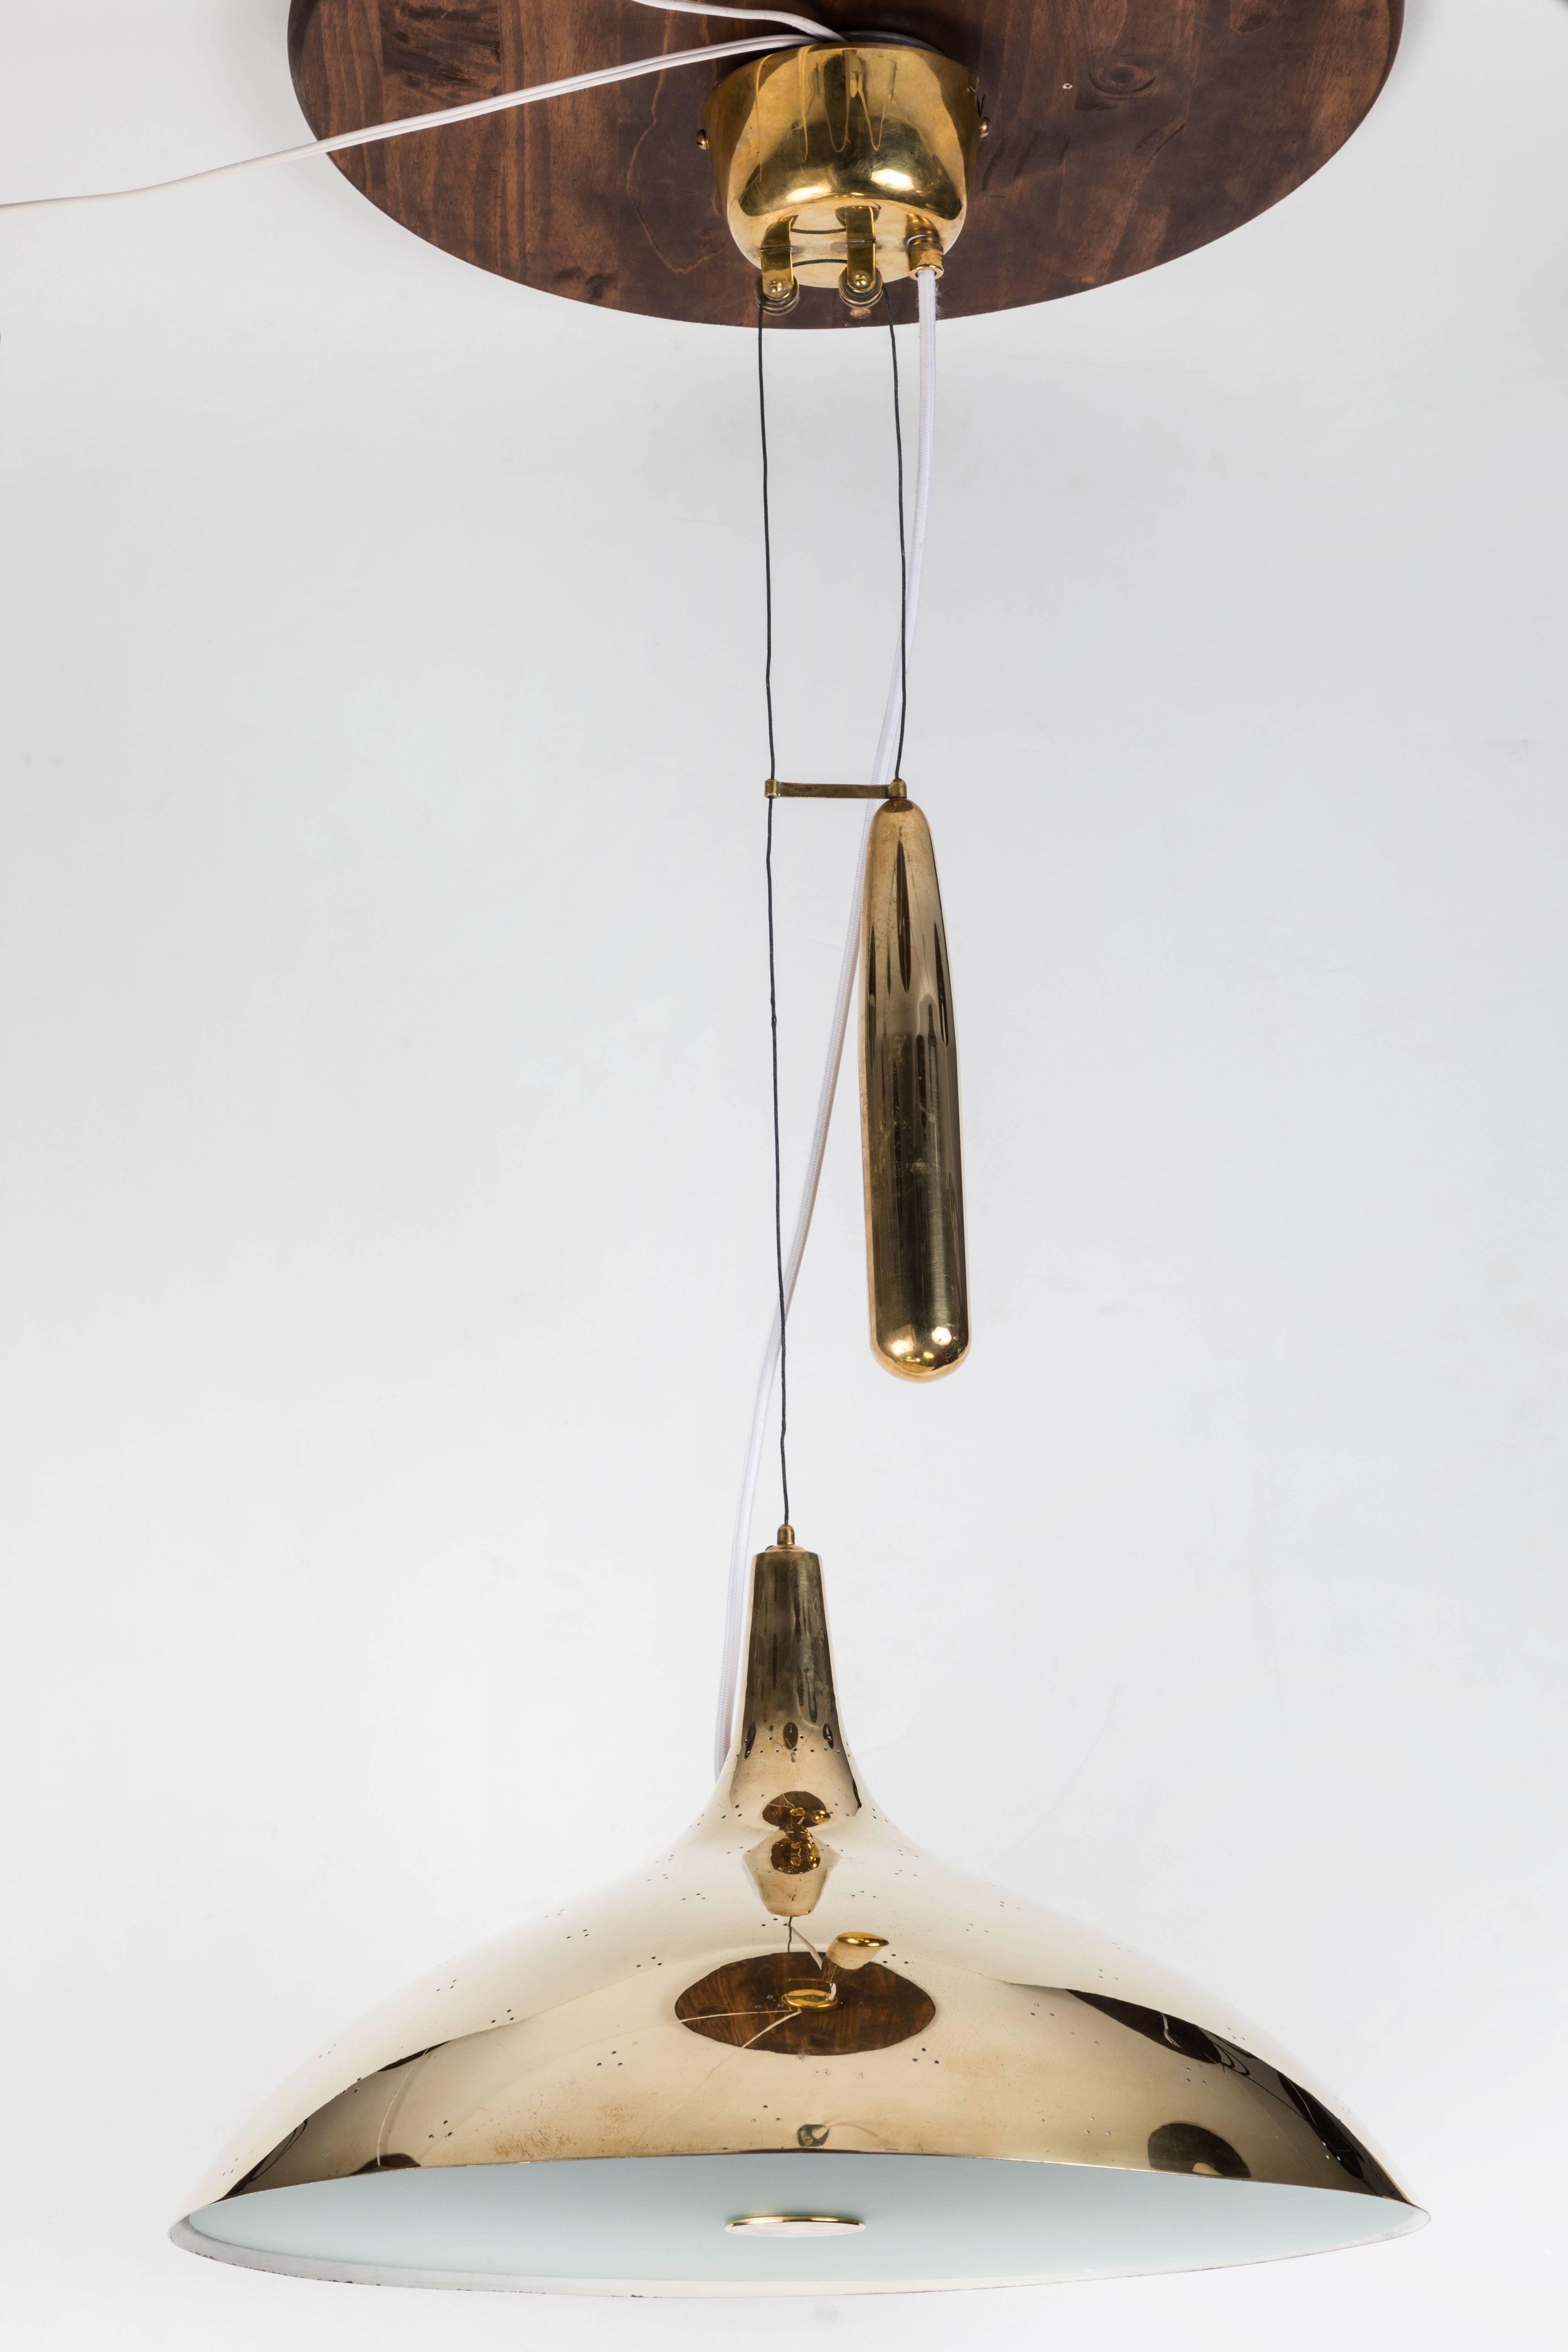 Paavo Tynell brass counterweight chandelier for Taito Oy. This rare and exceptionally refined ceiling light is executed in attractively patinated brass and opaline glass, and can be raised and lowered using its ingenious counterweight and pulley